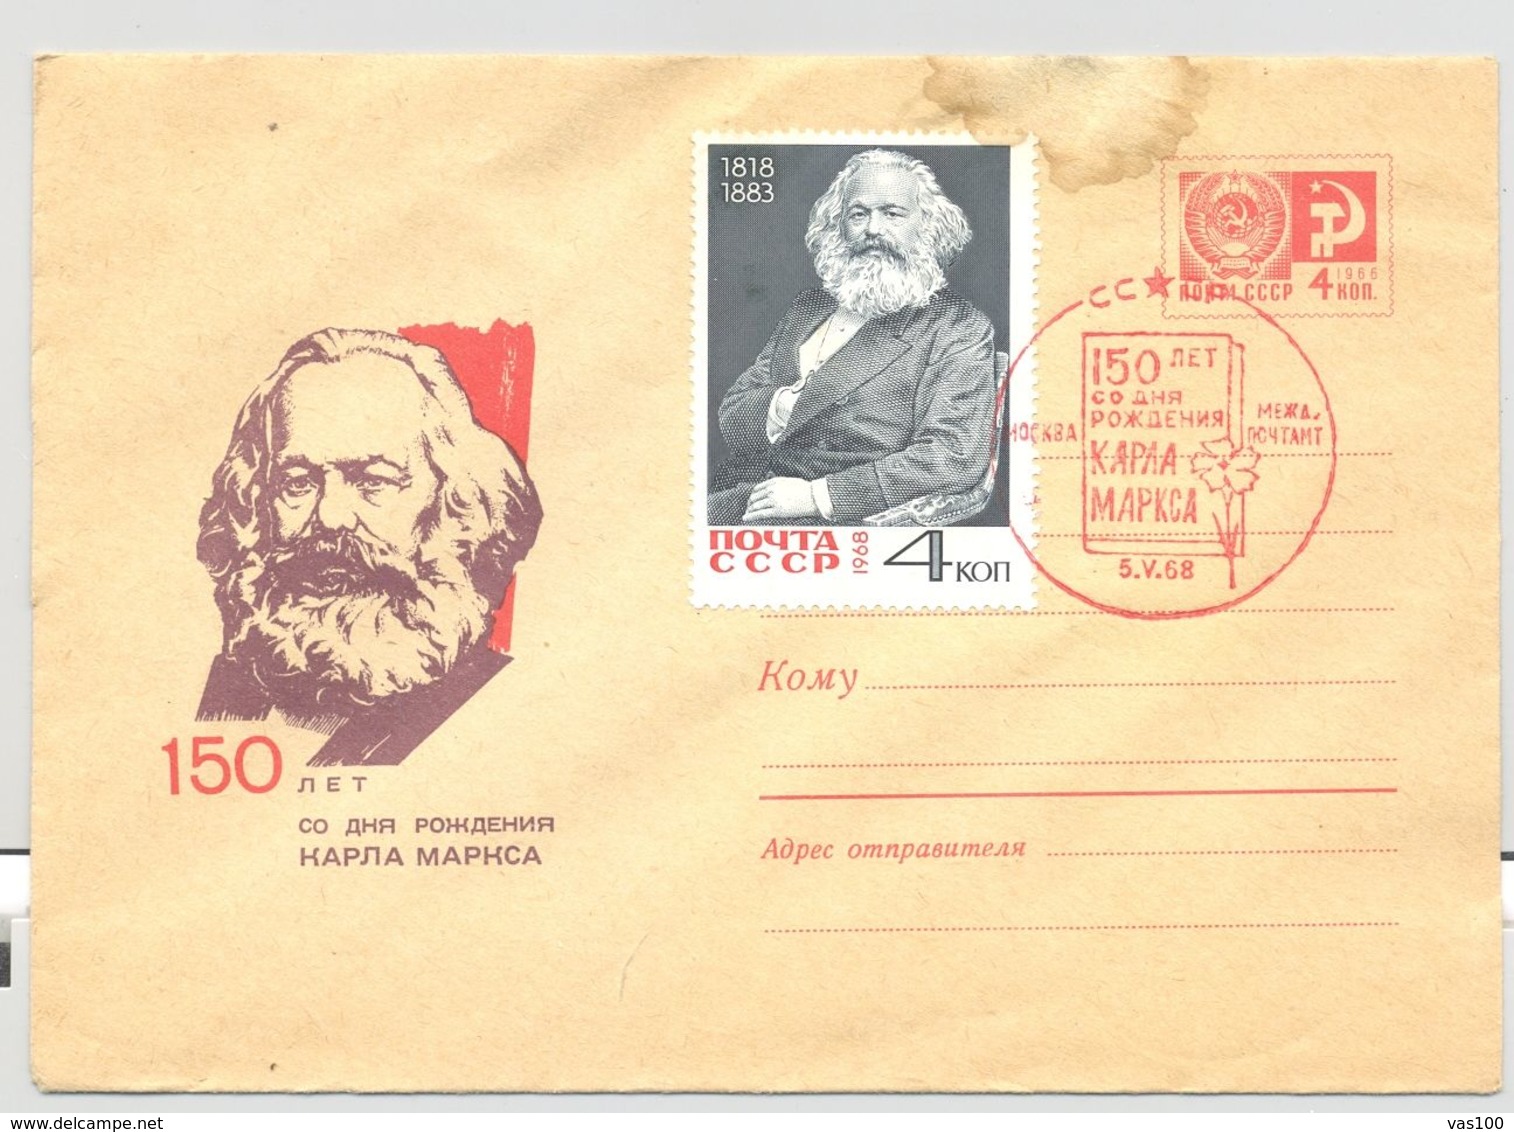 FAMOUS PEOPLE, KARL MARX, COVER STATIONERY, ENTIER POSTAL, 1968, RUSSIA - Karl Marx